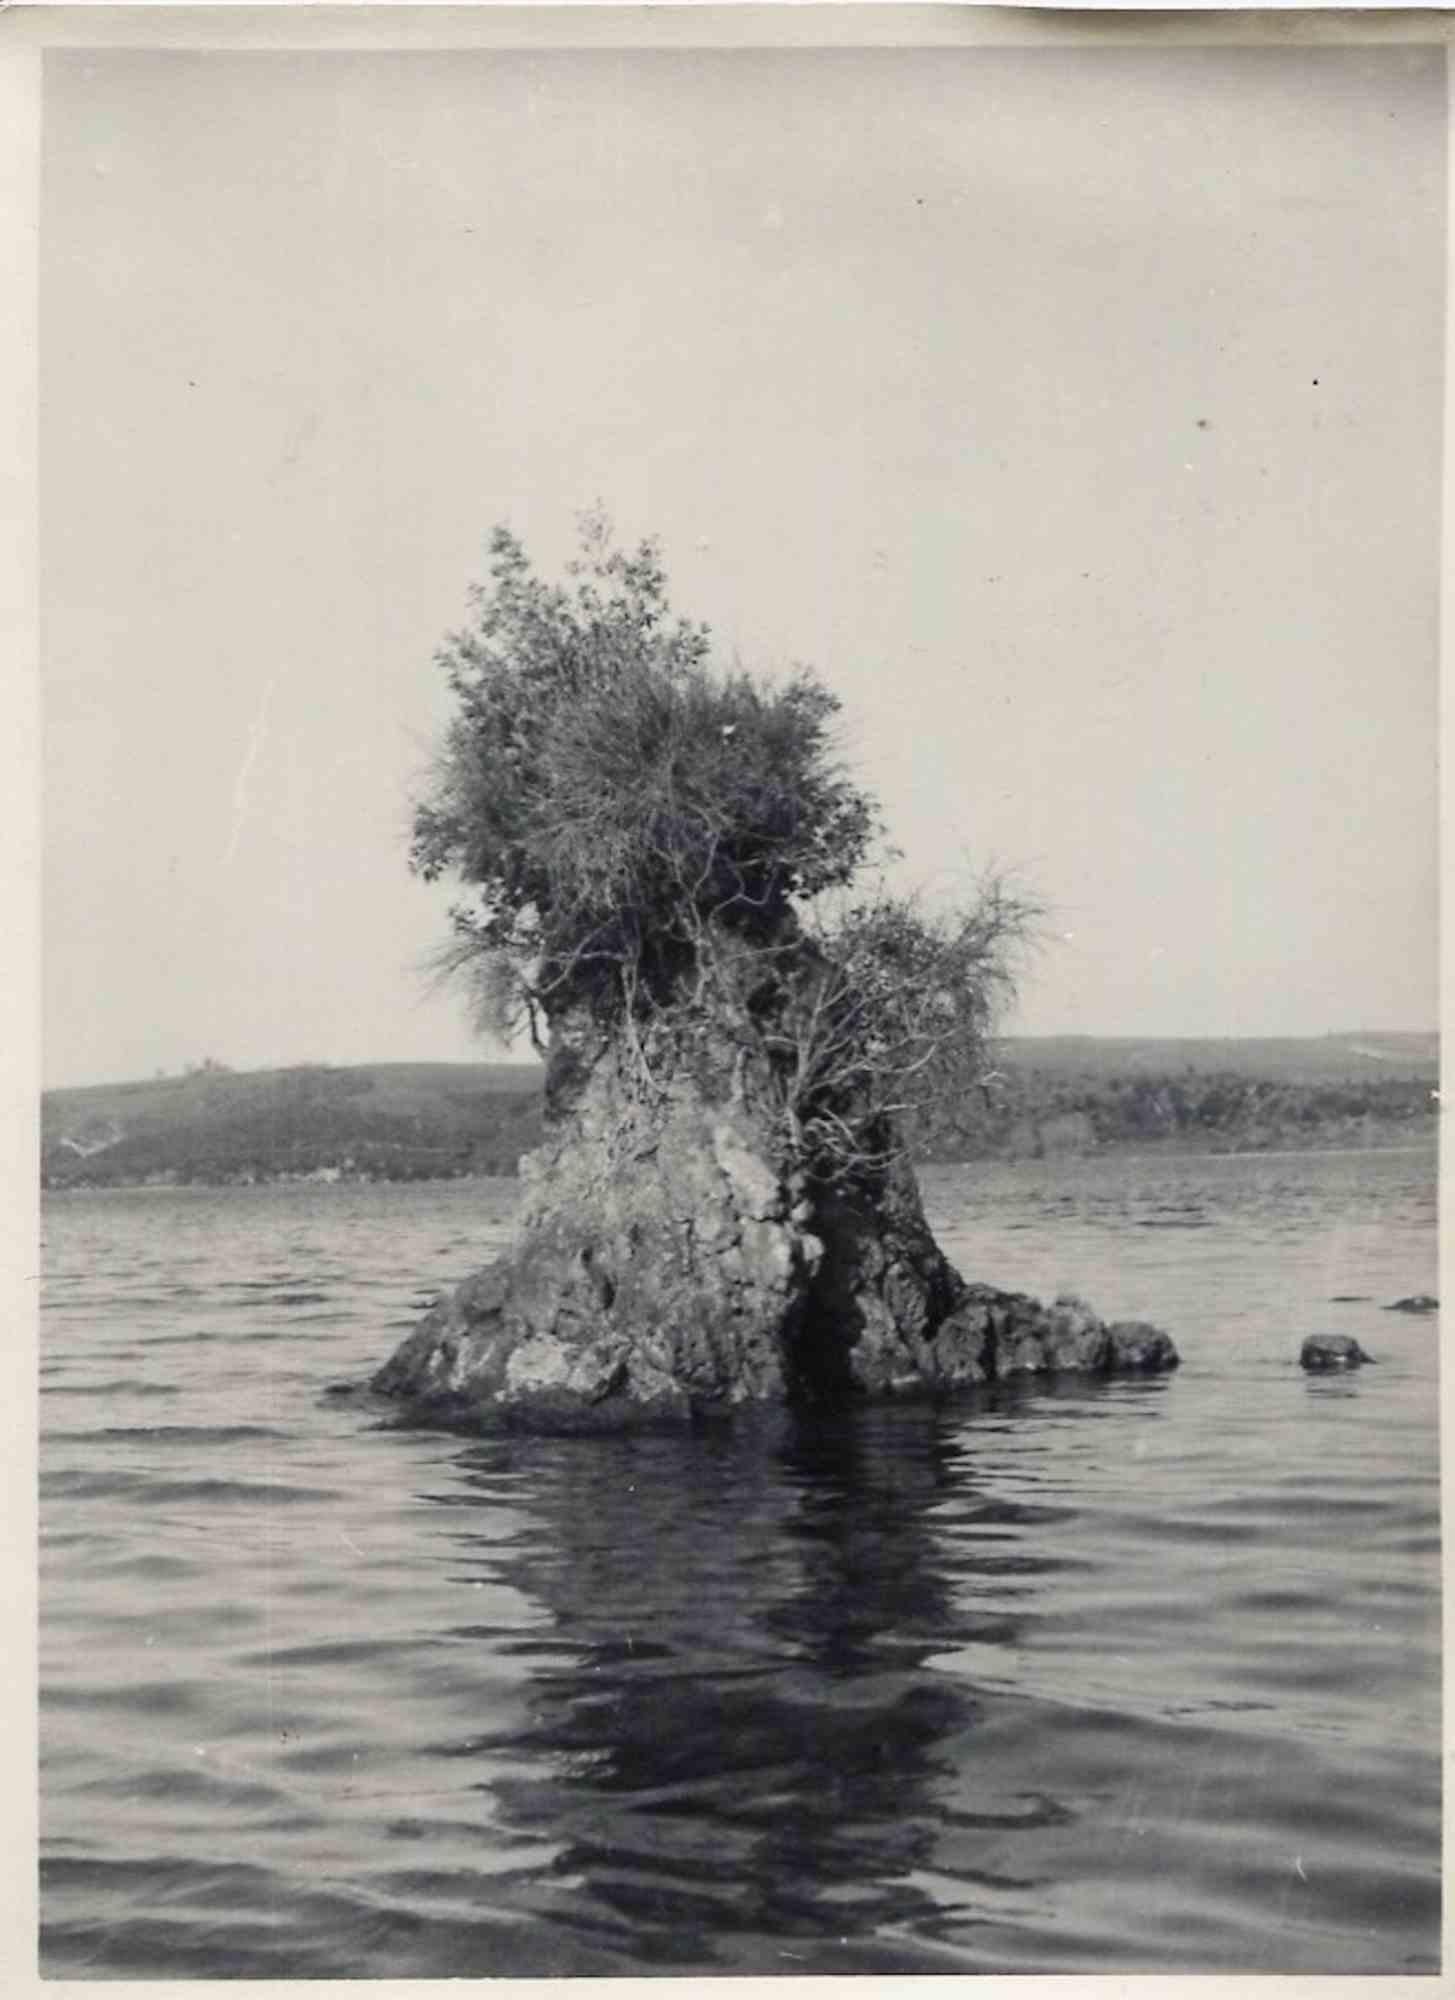 Unknown Figurative Photograph - Old days Photo - The Tree - Vintage Photo - Mid-20th Century